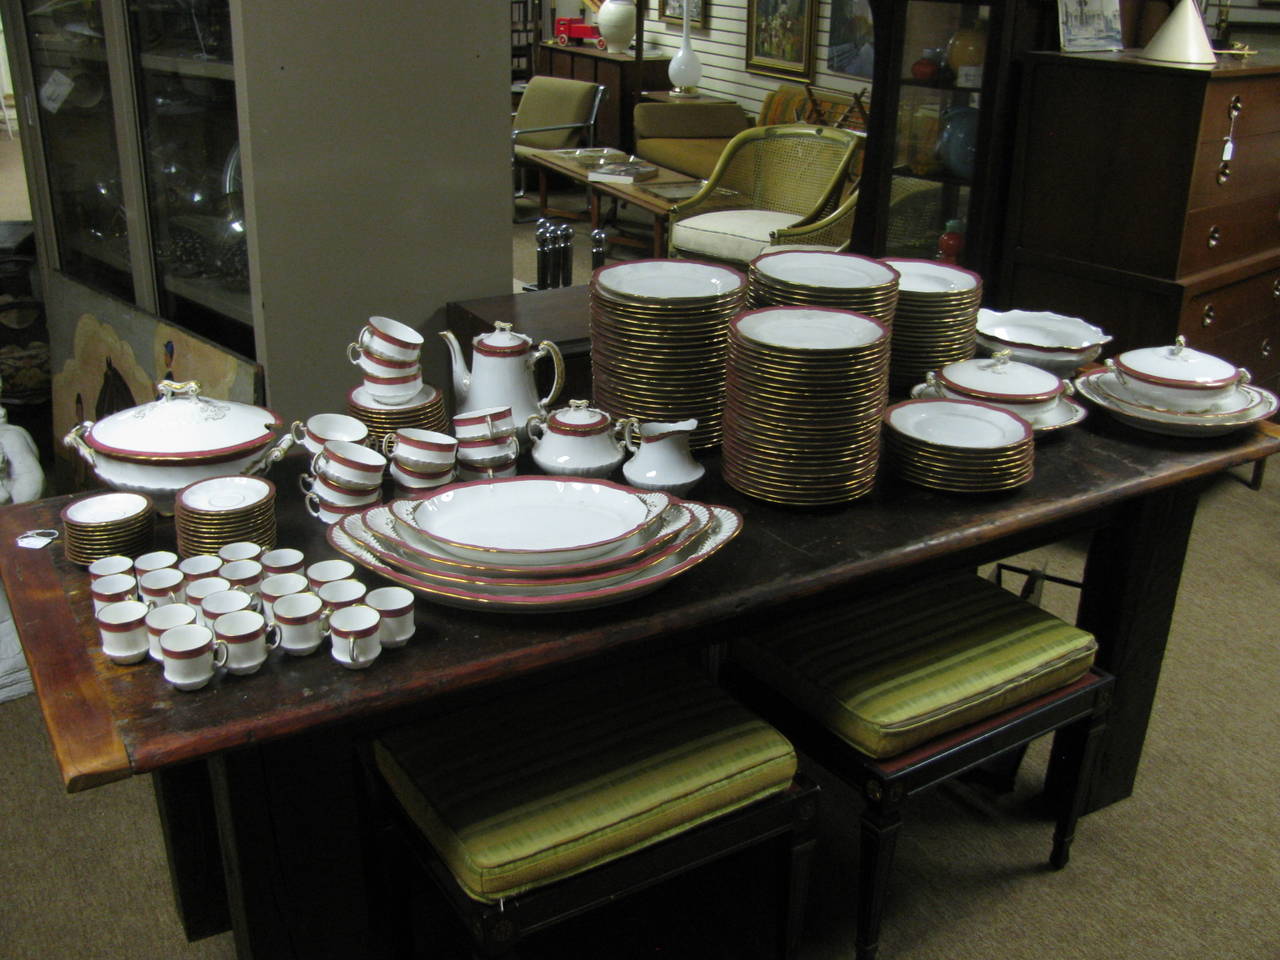 50 dinner plates 9.75 in., 34 lunch / salad plates 9 in., 17 deep soup bowls 9.5 in., three round platters 14.25 in and 2 12 in., four graduated oval platters 21, 19, 16.5, and 14 in., 15 tea cups with 16 saucers, 12 coffee cups with 13 saucers,